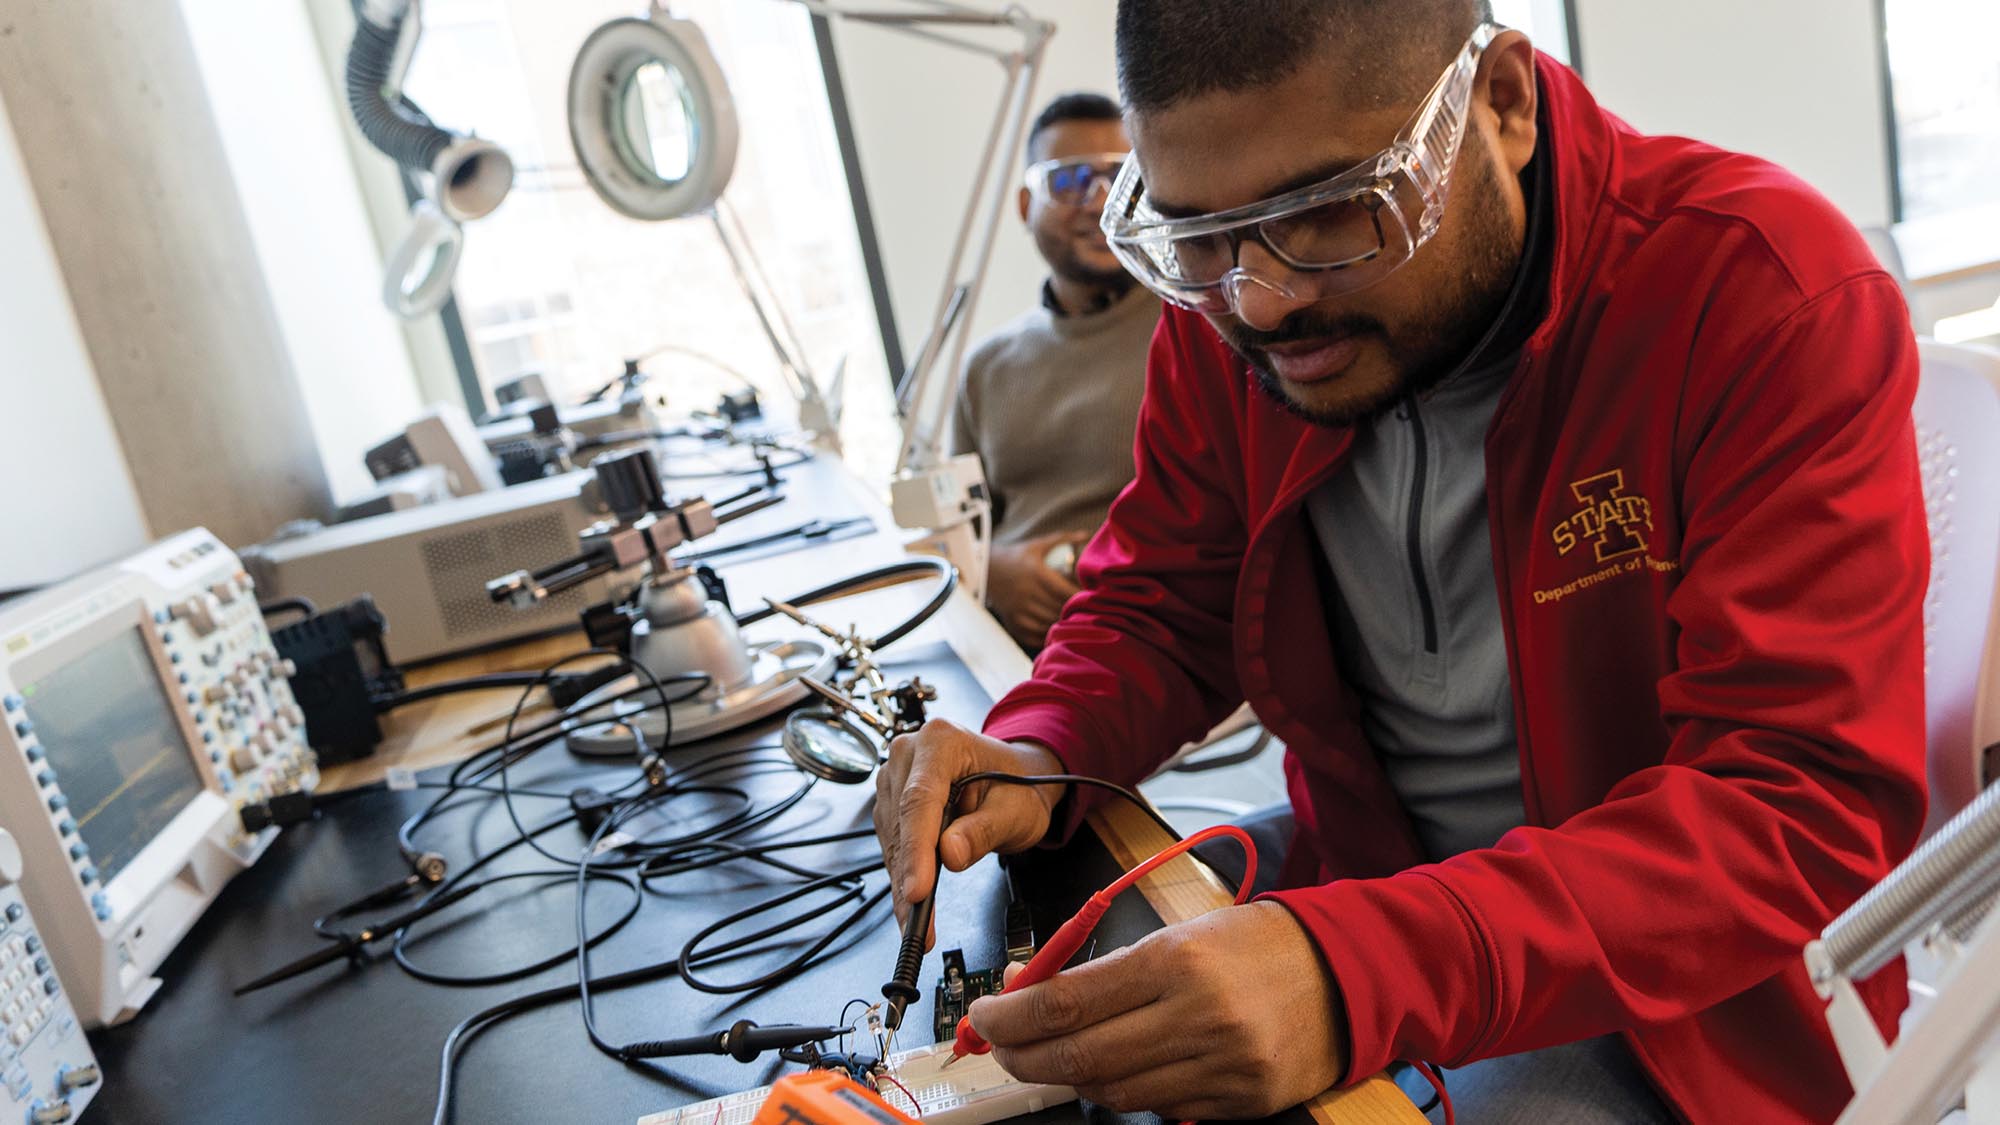 Two students work on electronics in the soldering lab.